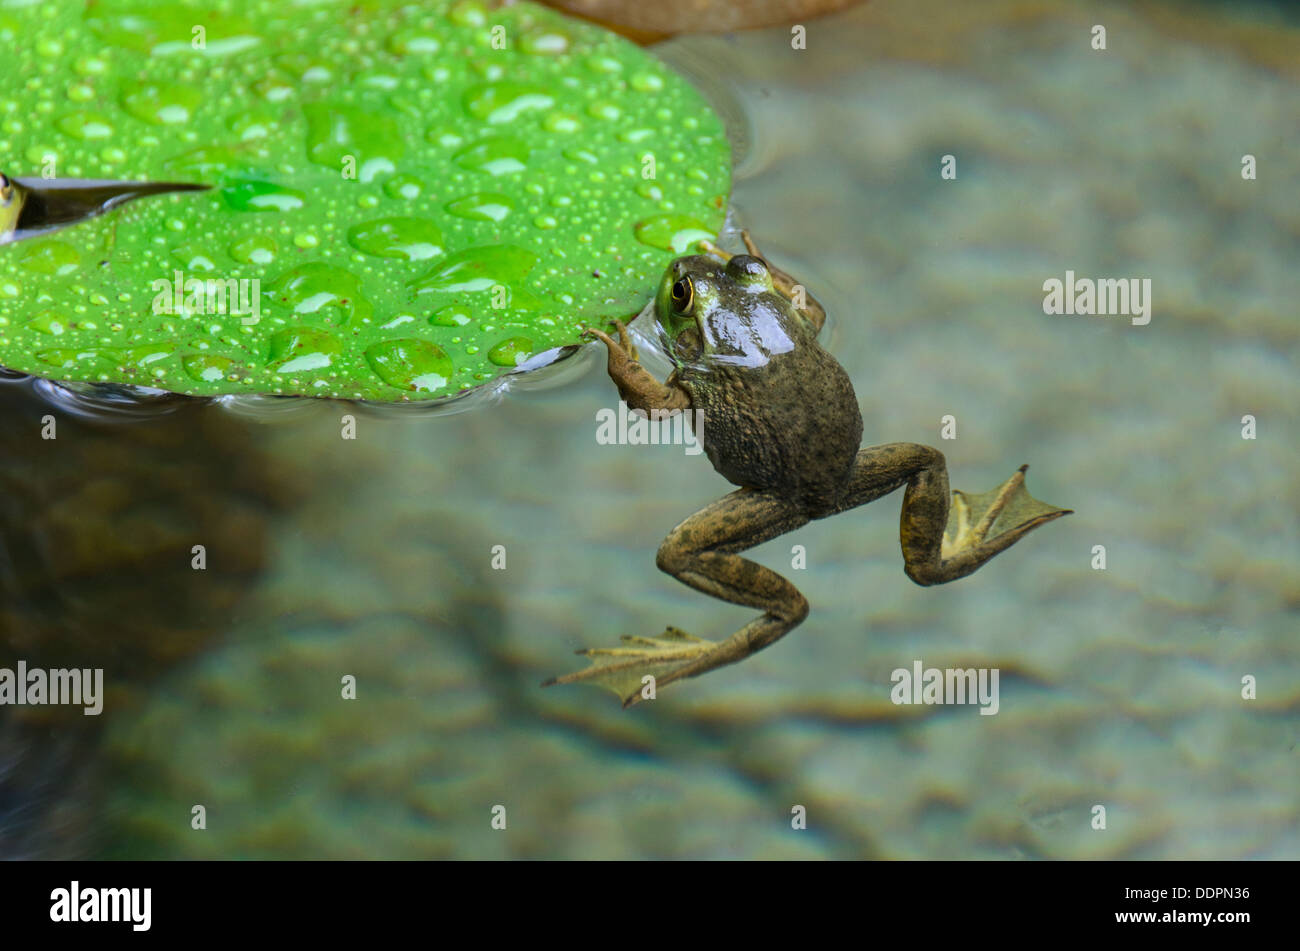 Northern Green Frog clinging to lily pad. Stock Photo